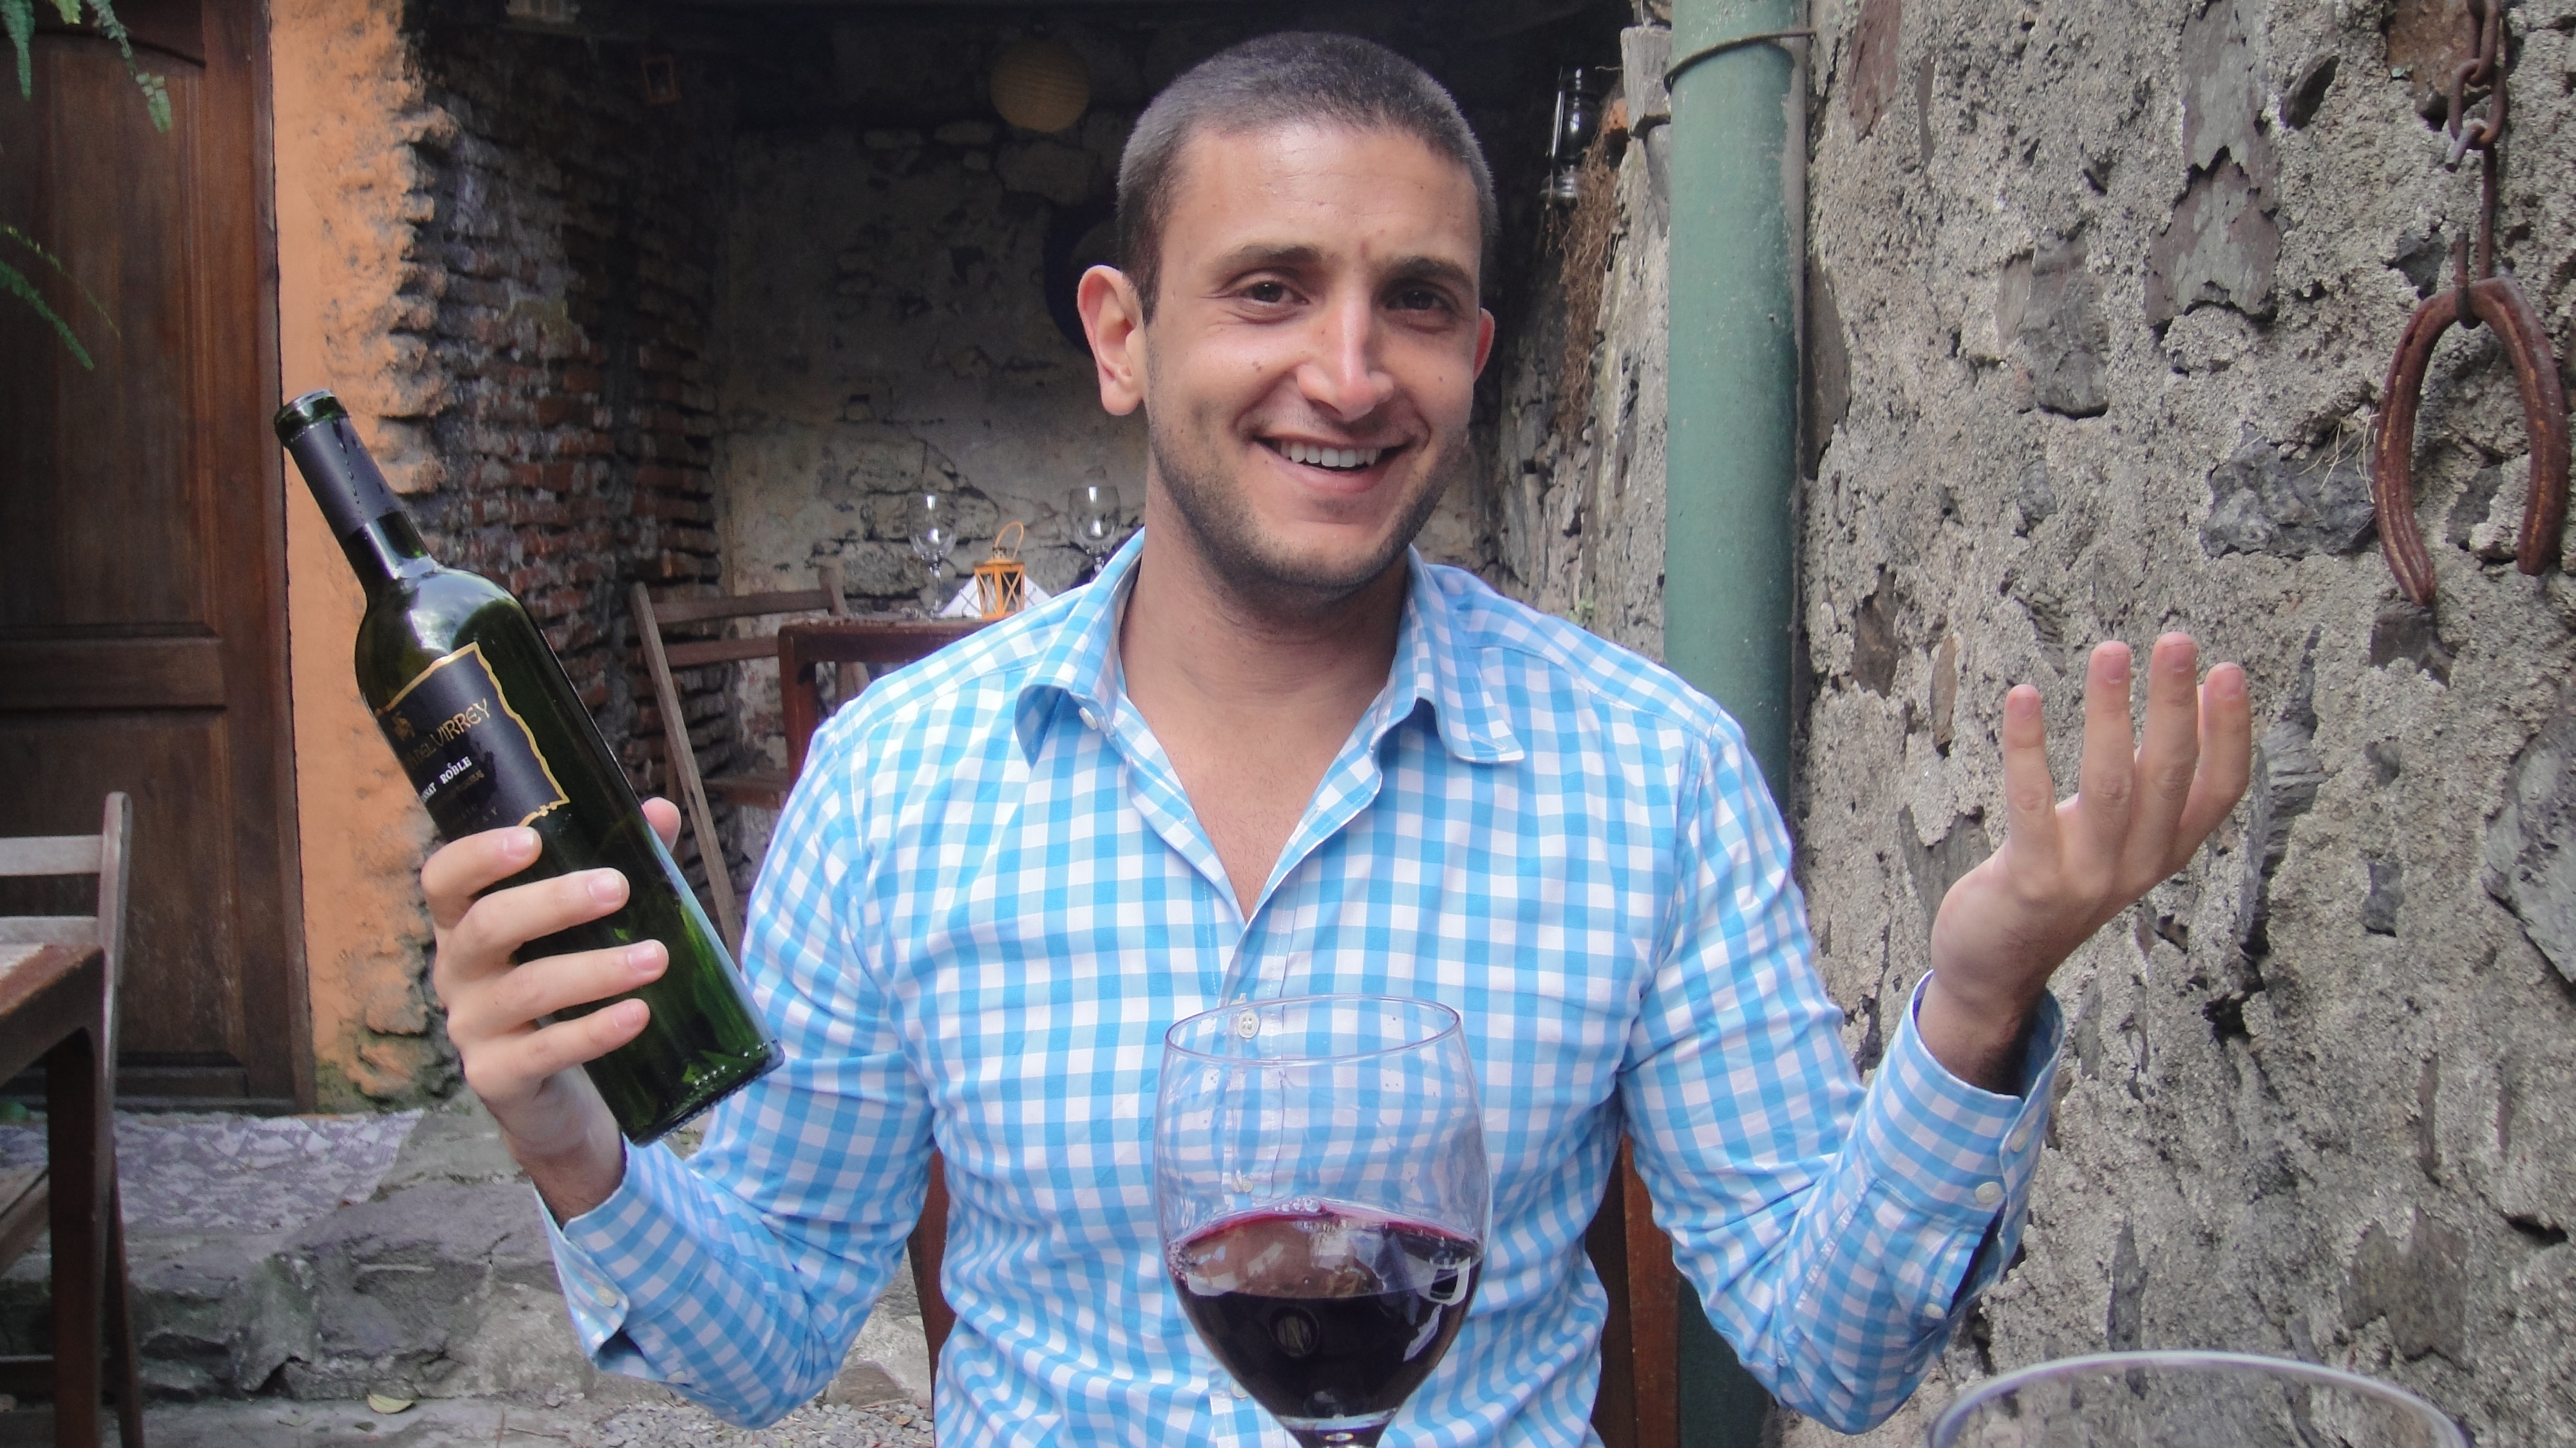 a man holding a glass of wine and a bottle